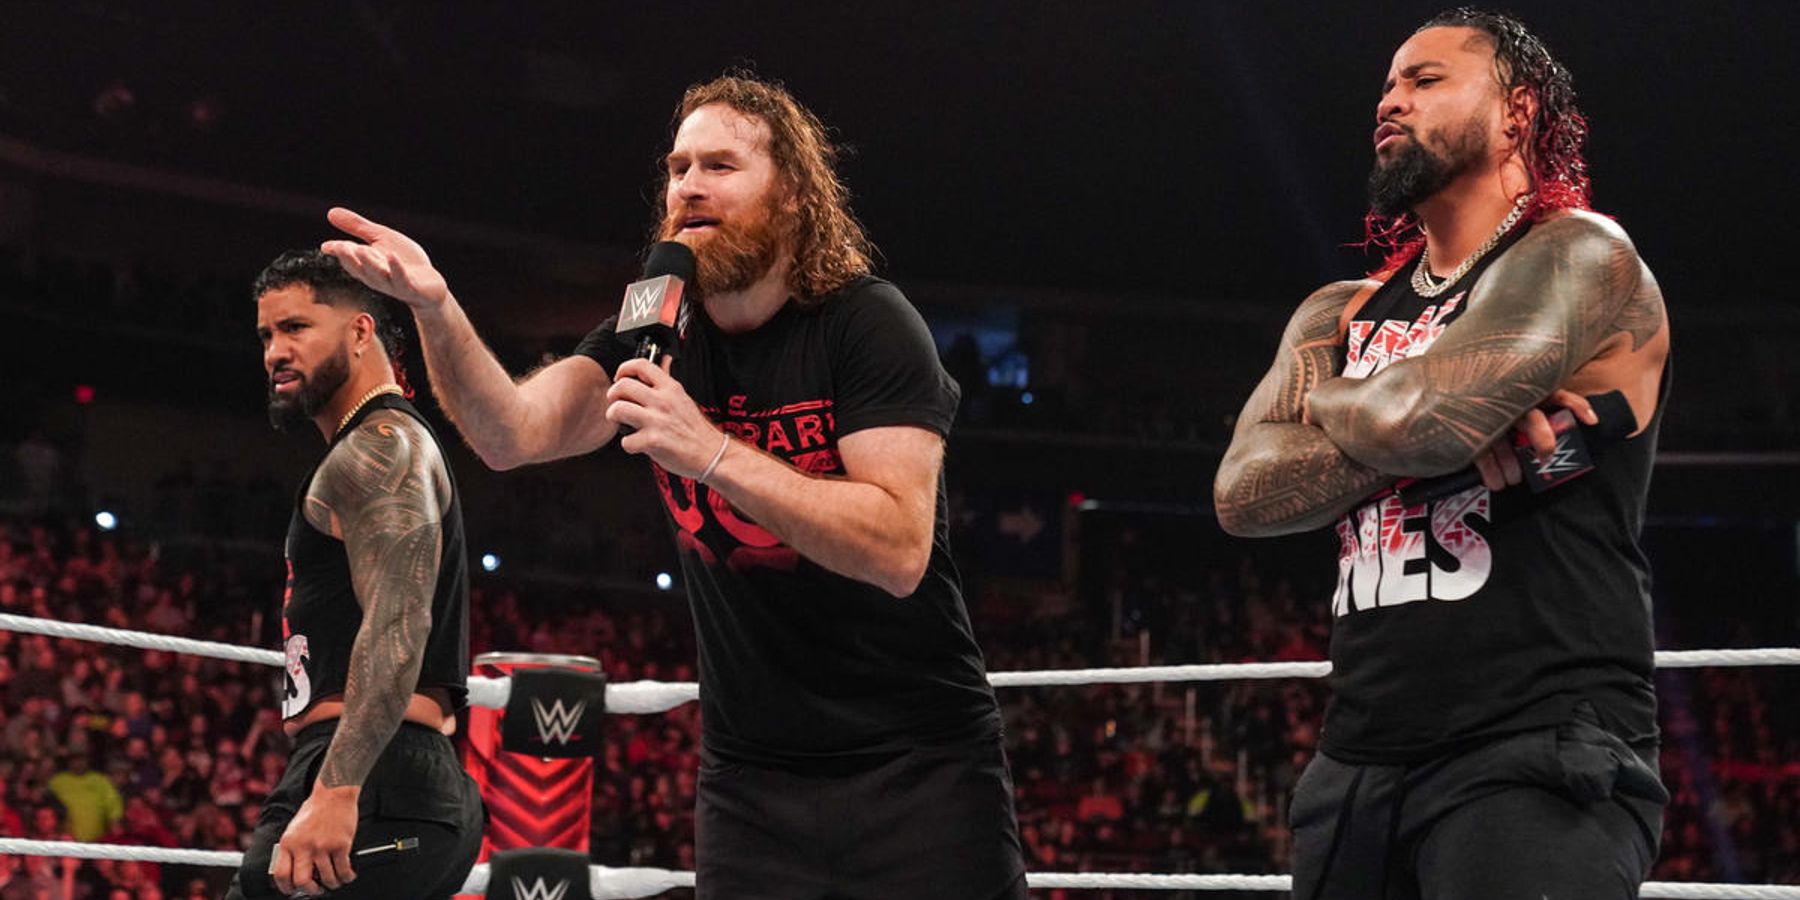 The Bloodline invades WWE Raw in December of 2022 at the urging of Roman Reigns.